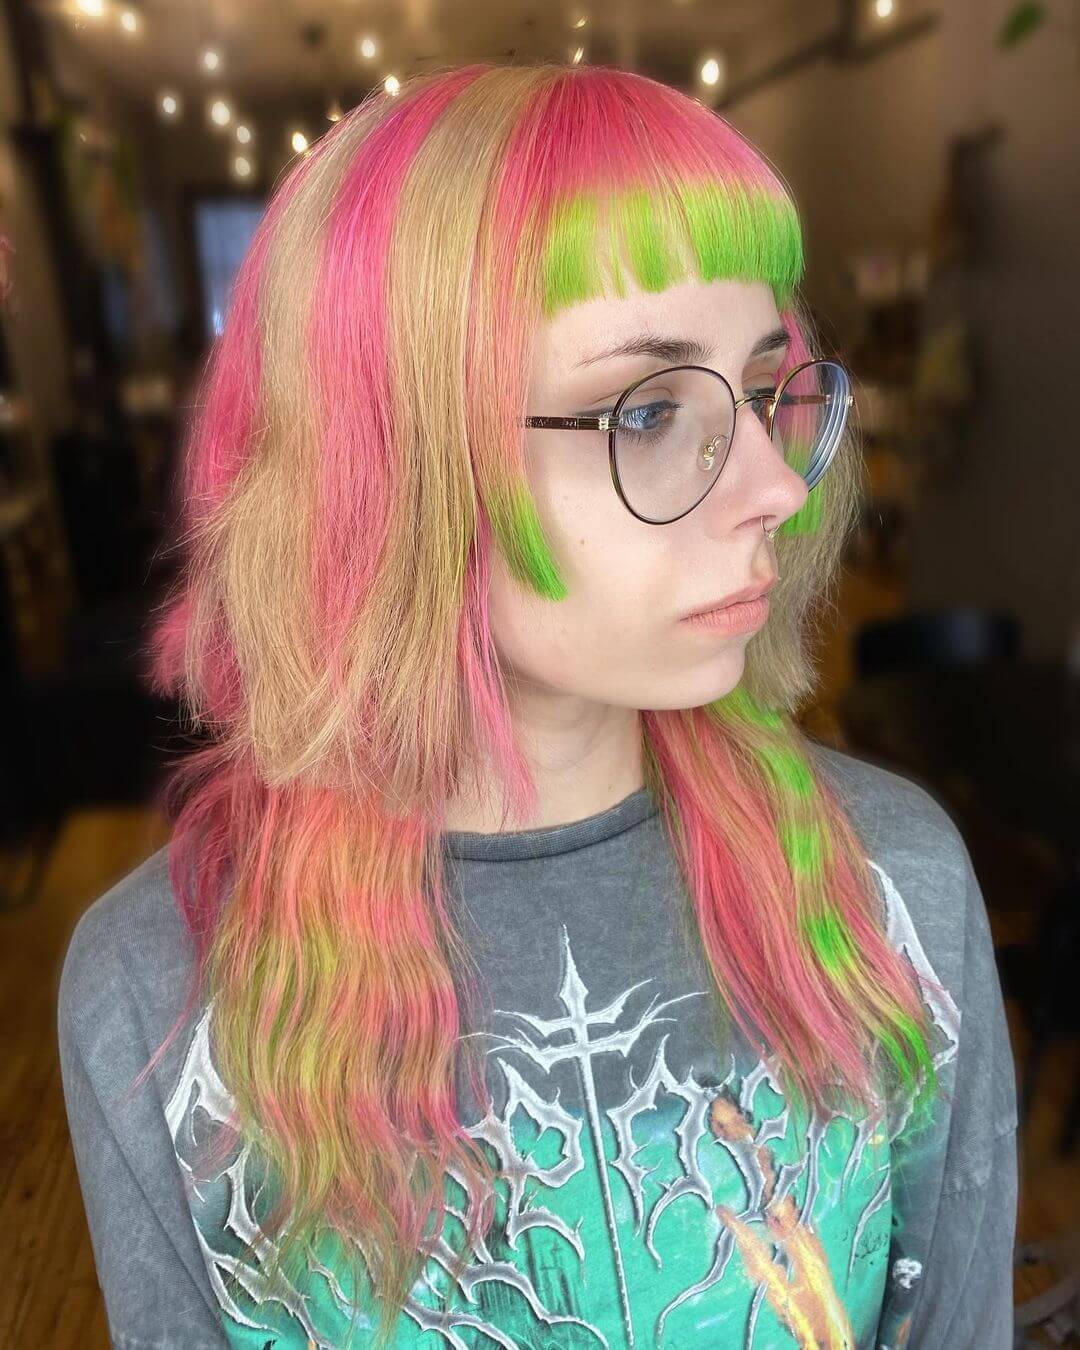 Vibrant jellyfish haircut with neon pink and lime green swirls, complemented by sharp bangs.